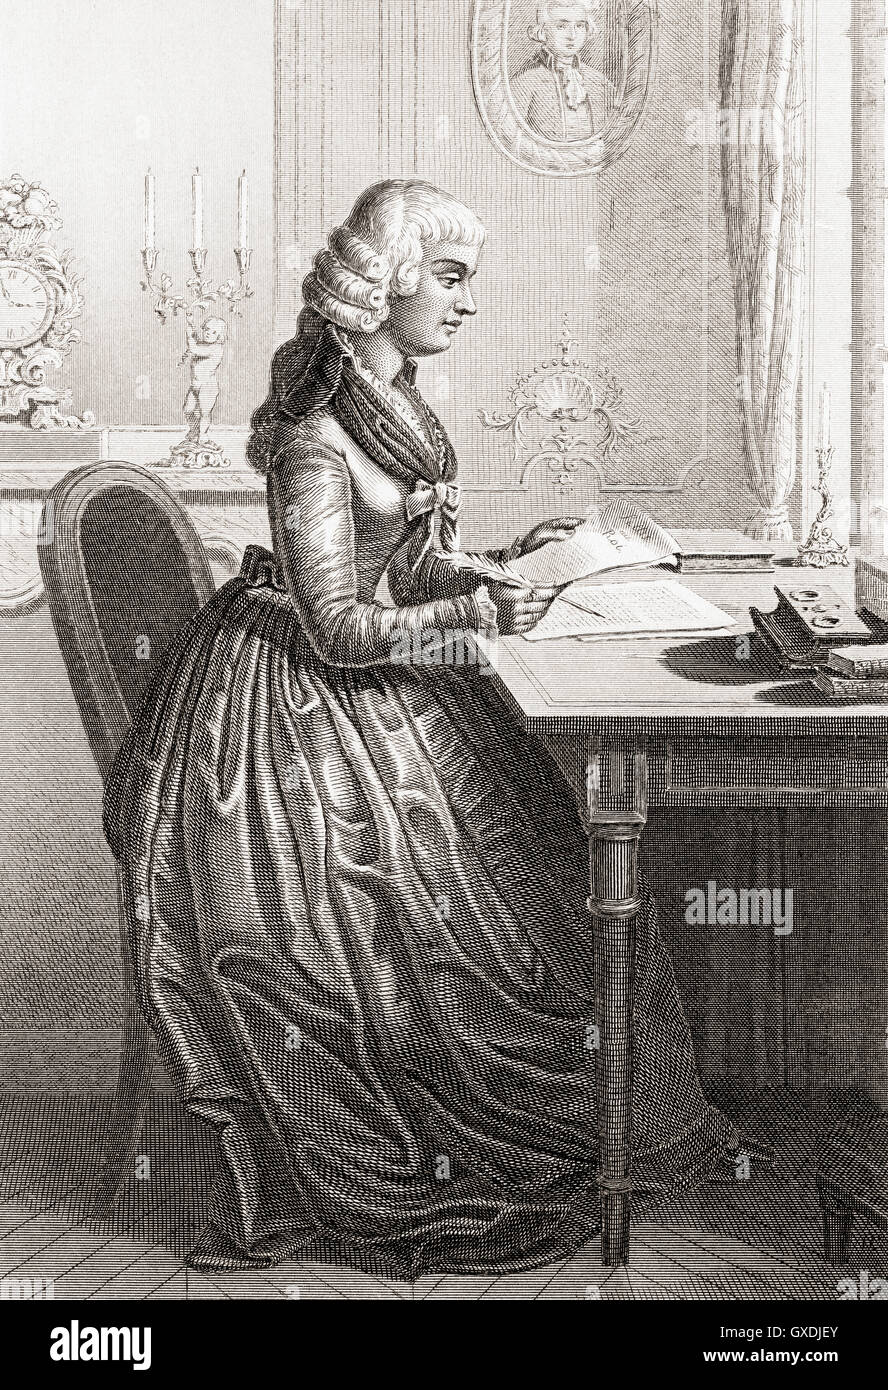 Madame Roland née Marie-Jeanne Phlippon, aka Jeanne Manon Roland, 1754 – 1793, was, together with her husband Jean-Marie Roland de la Platière, a supporter of the French Revolution and influential member of the Girondist faction. Stock Photo